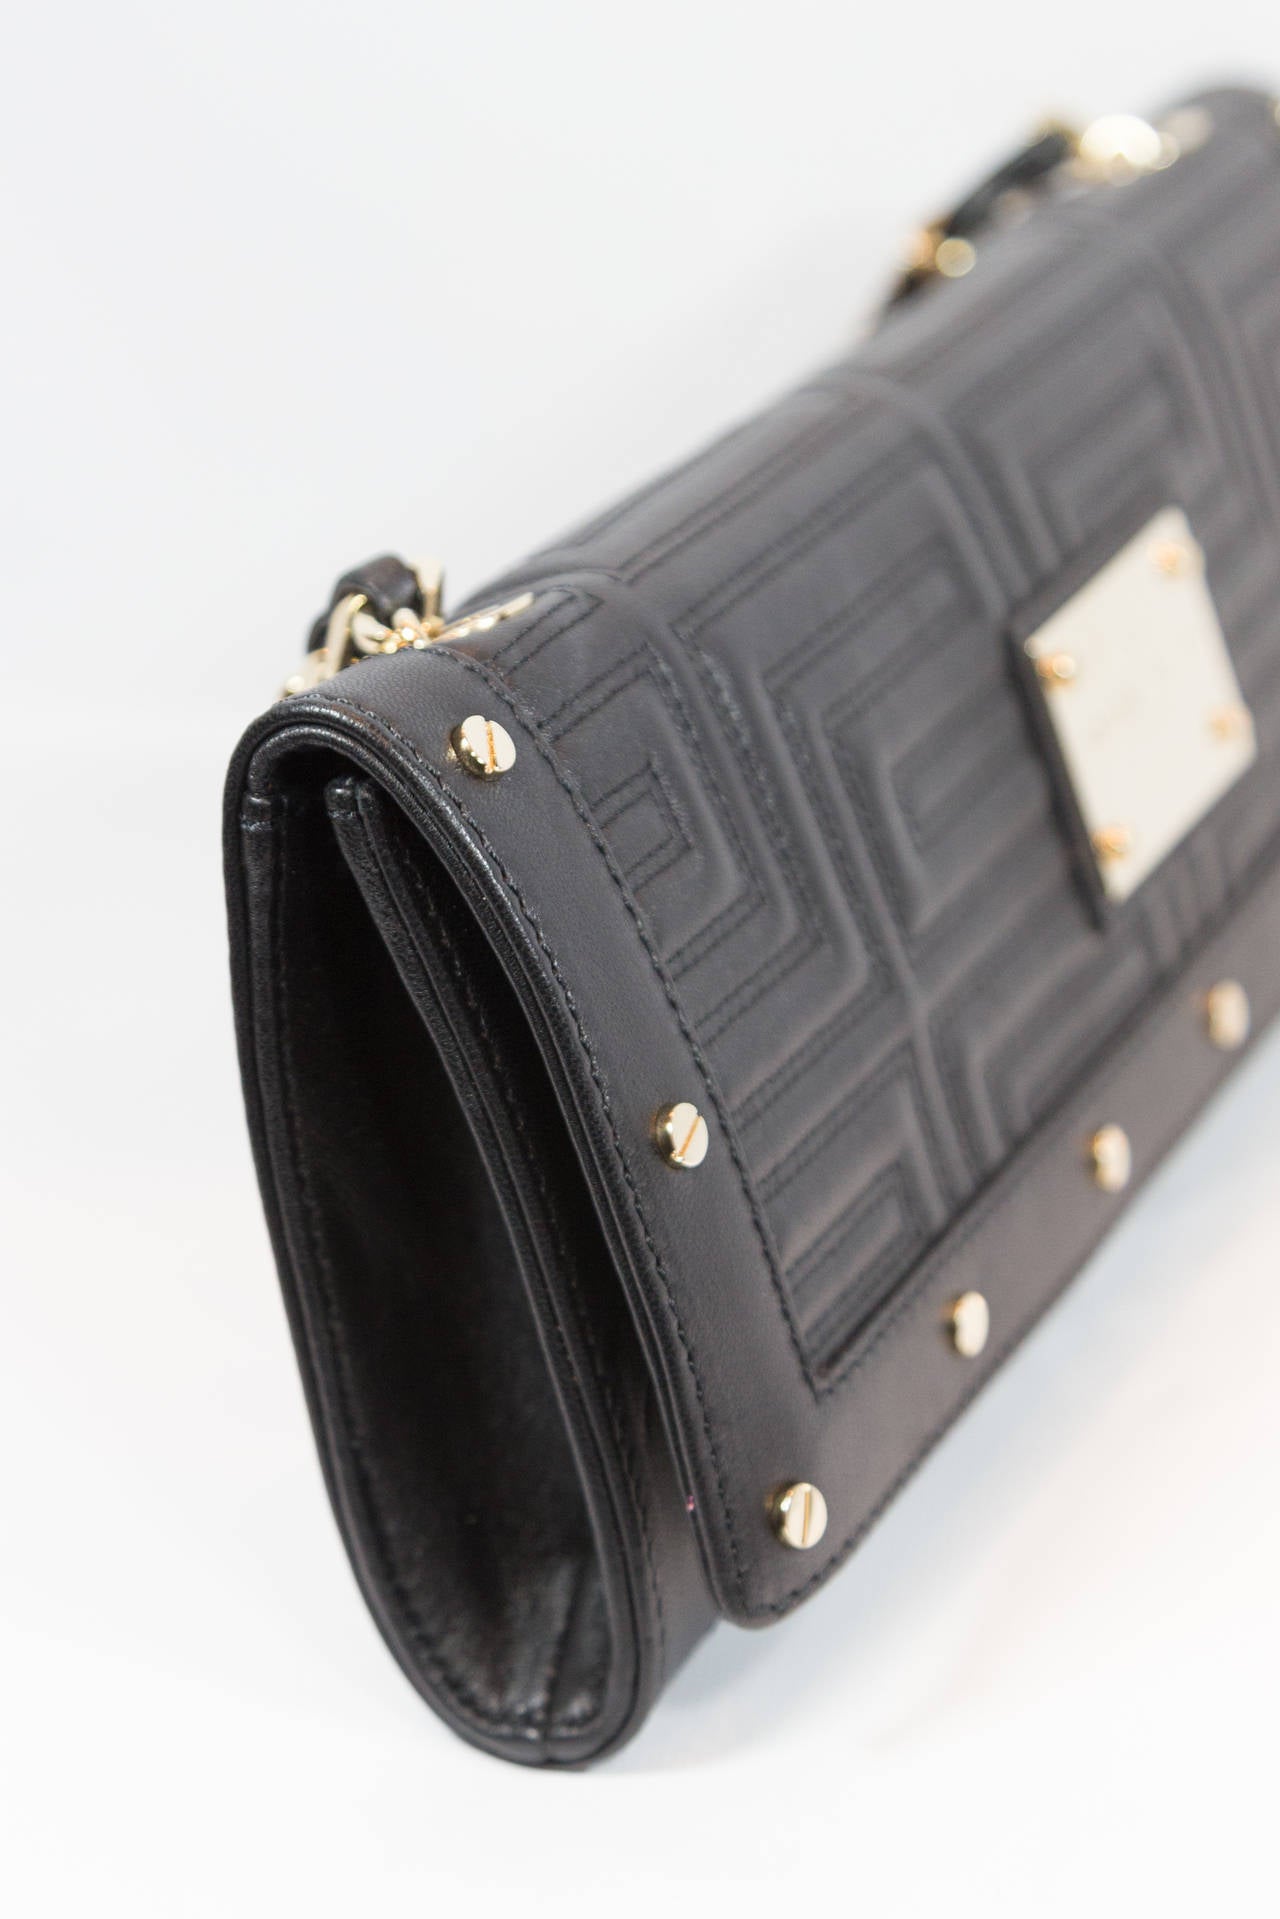 Gianni Versace Black Patent Leather Clutch 1